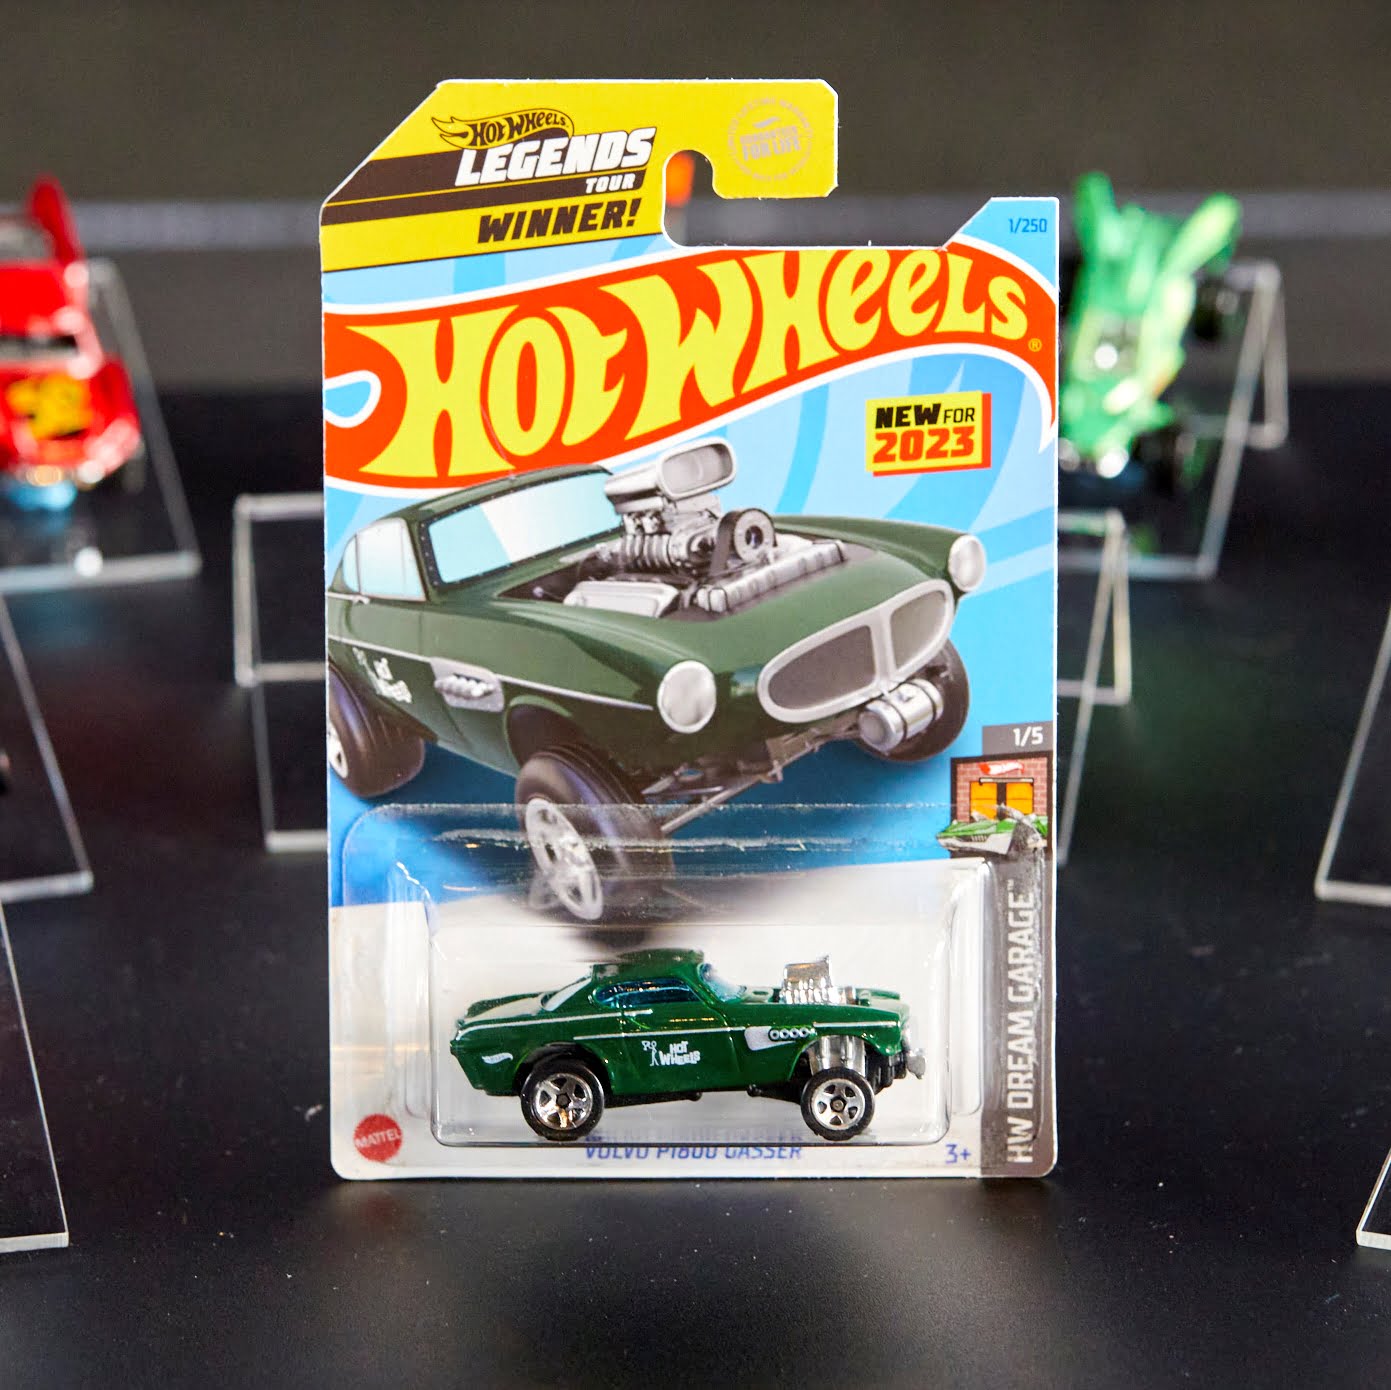 Hot Wheels via Extension PR for use by 360 Magazine